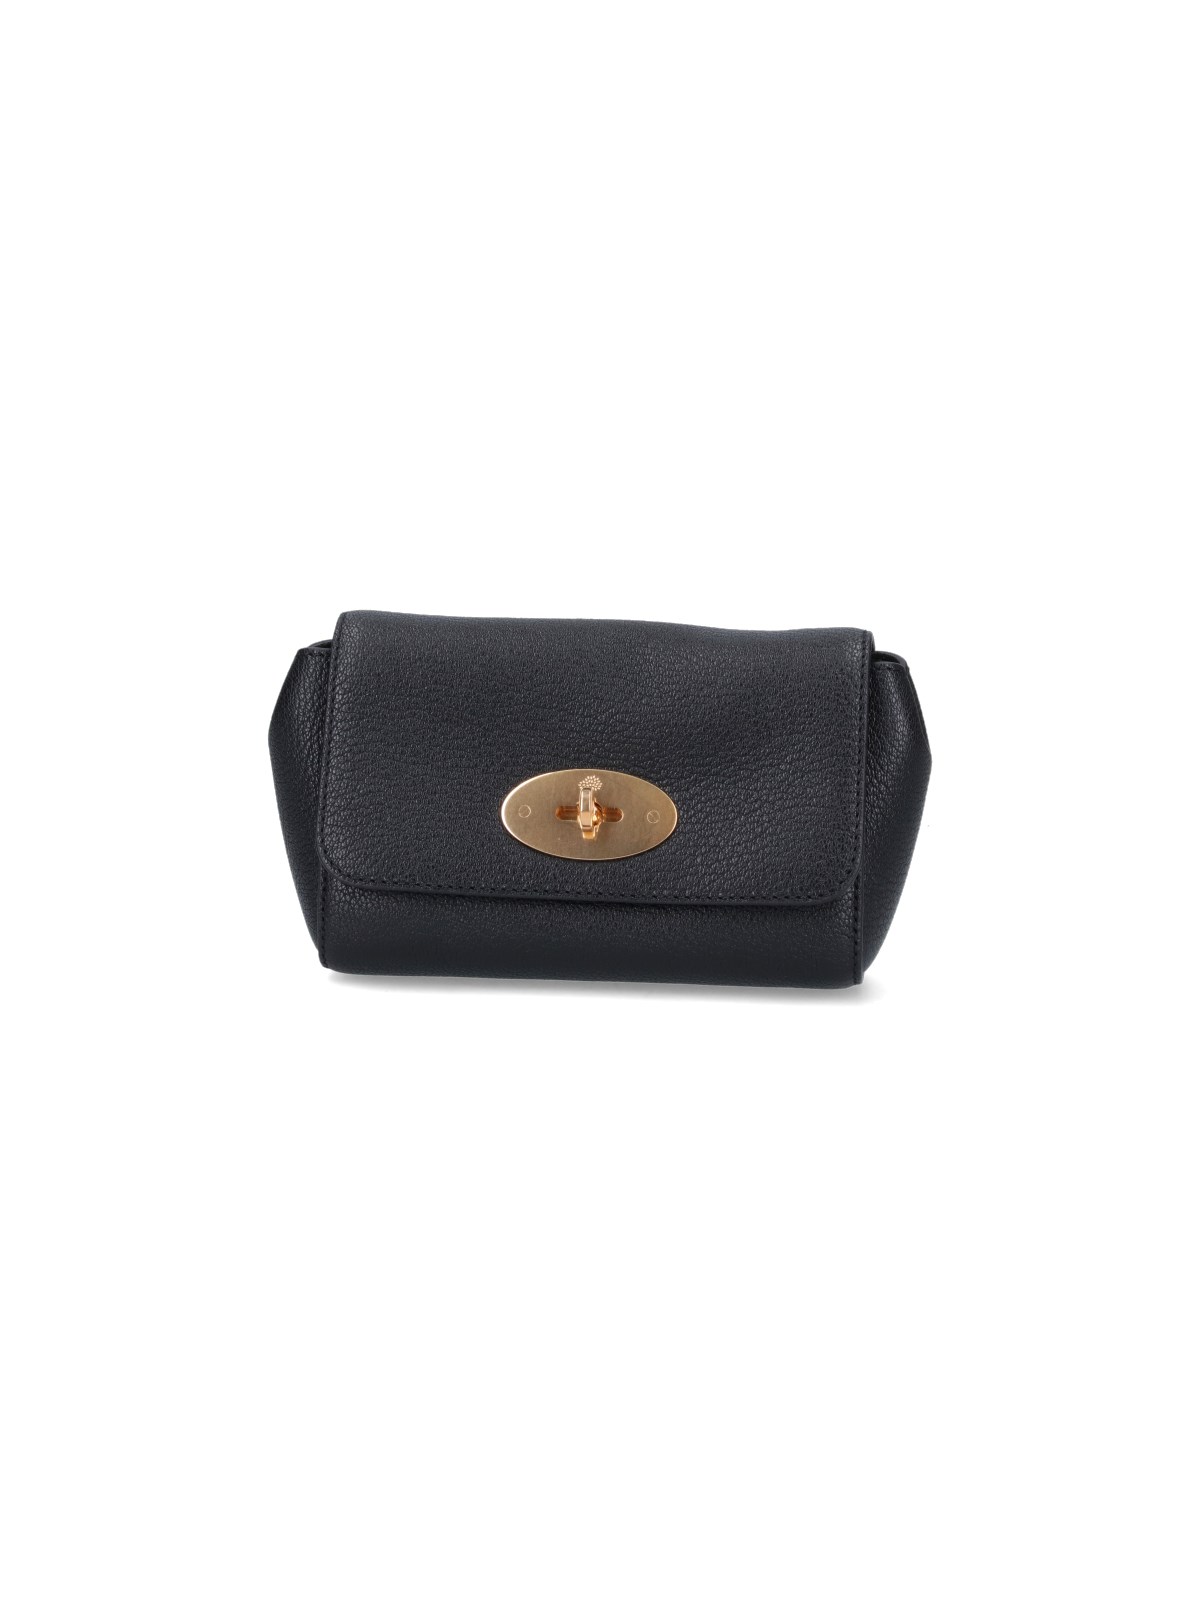 Mulberry "mini Lily" Bag In Black  